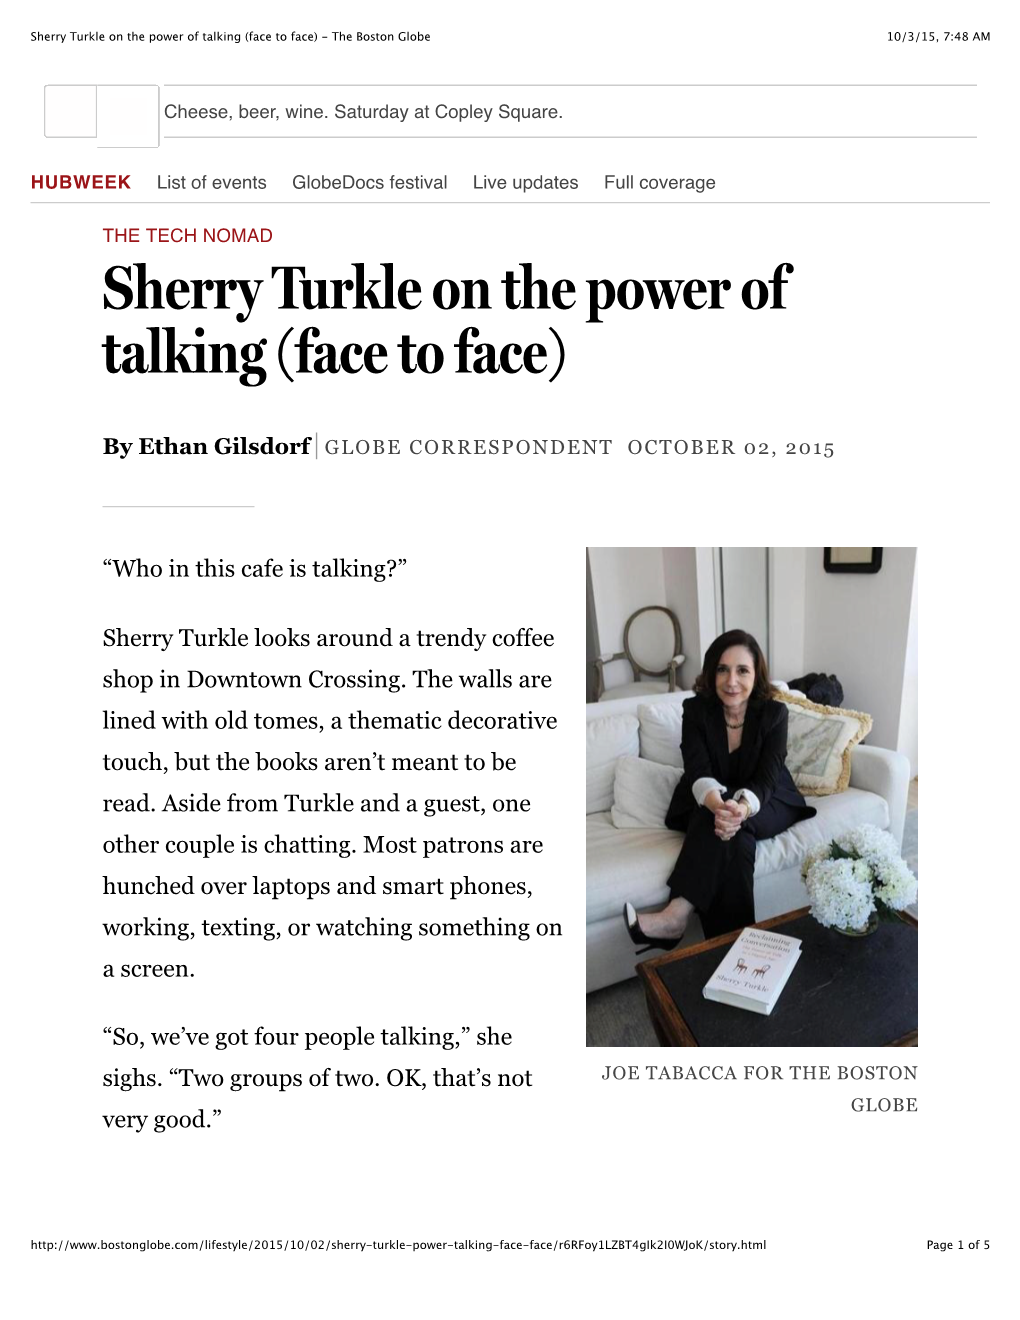 Sherry Turkle on the Power of Talking (Face to Face) - the Boston Globe 10/3/15, 7:48 AM